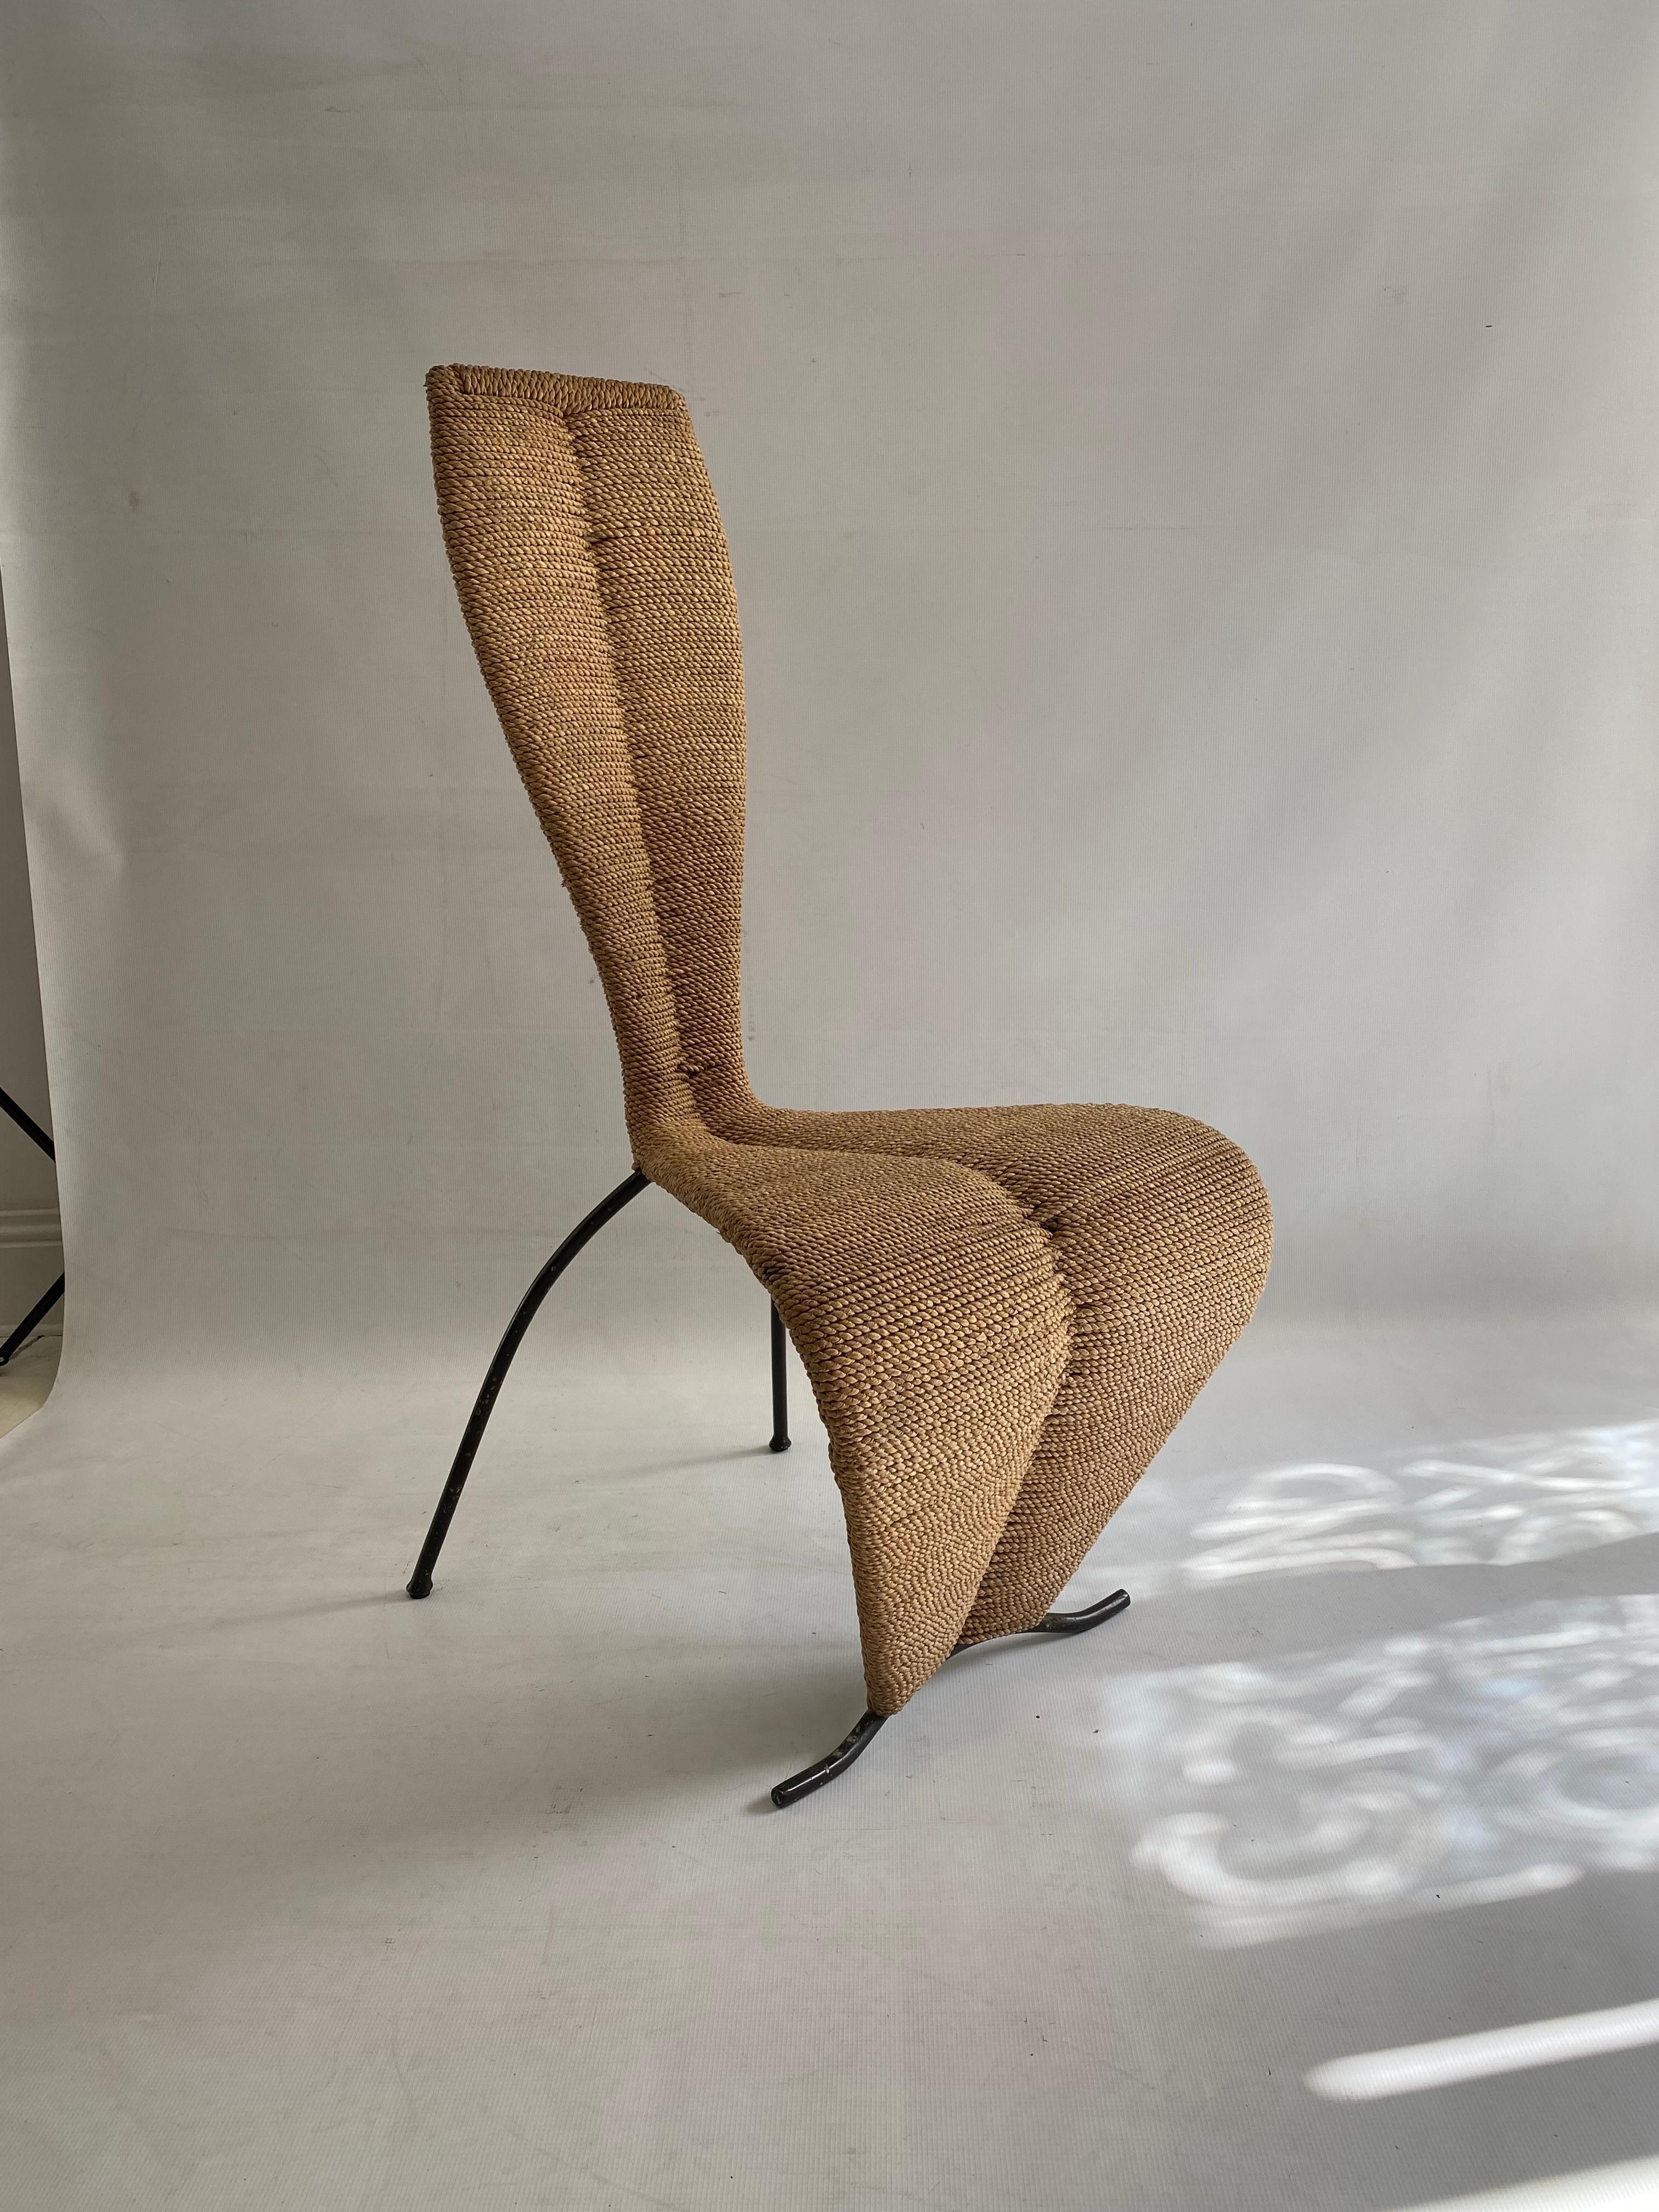 An amazing and rare chair designed after the famous 'S' chair of Tom Dixon. The chair is weaved with rope or rushed around a metal frame. It holds a beautiful hourglass shape that's playful and resembles a seating feminine body making it highly